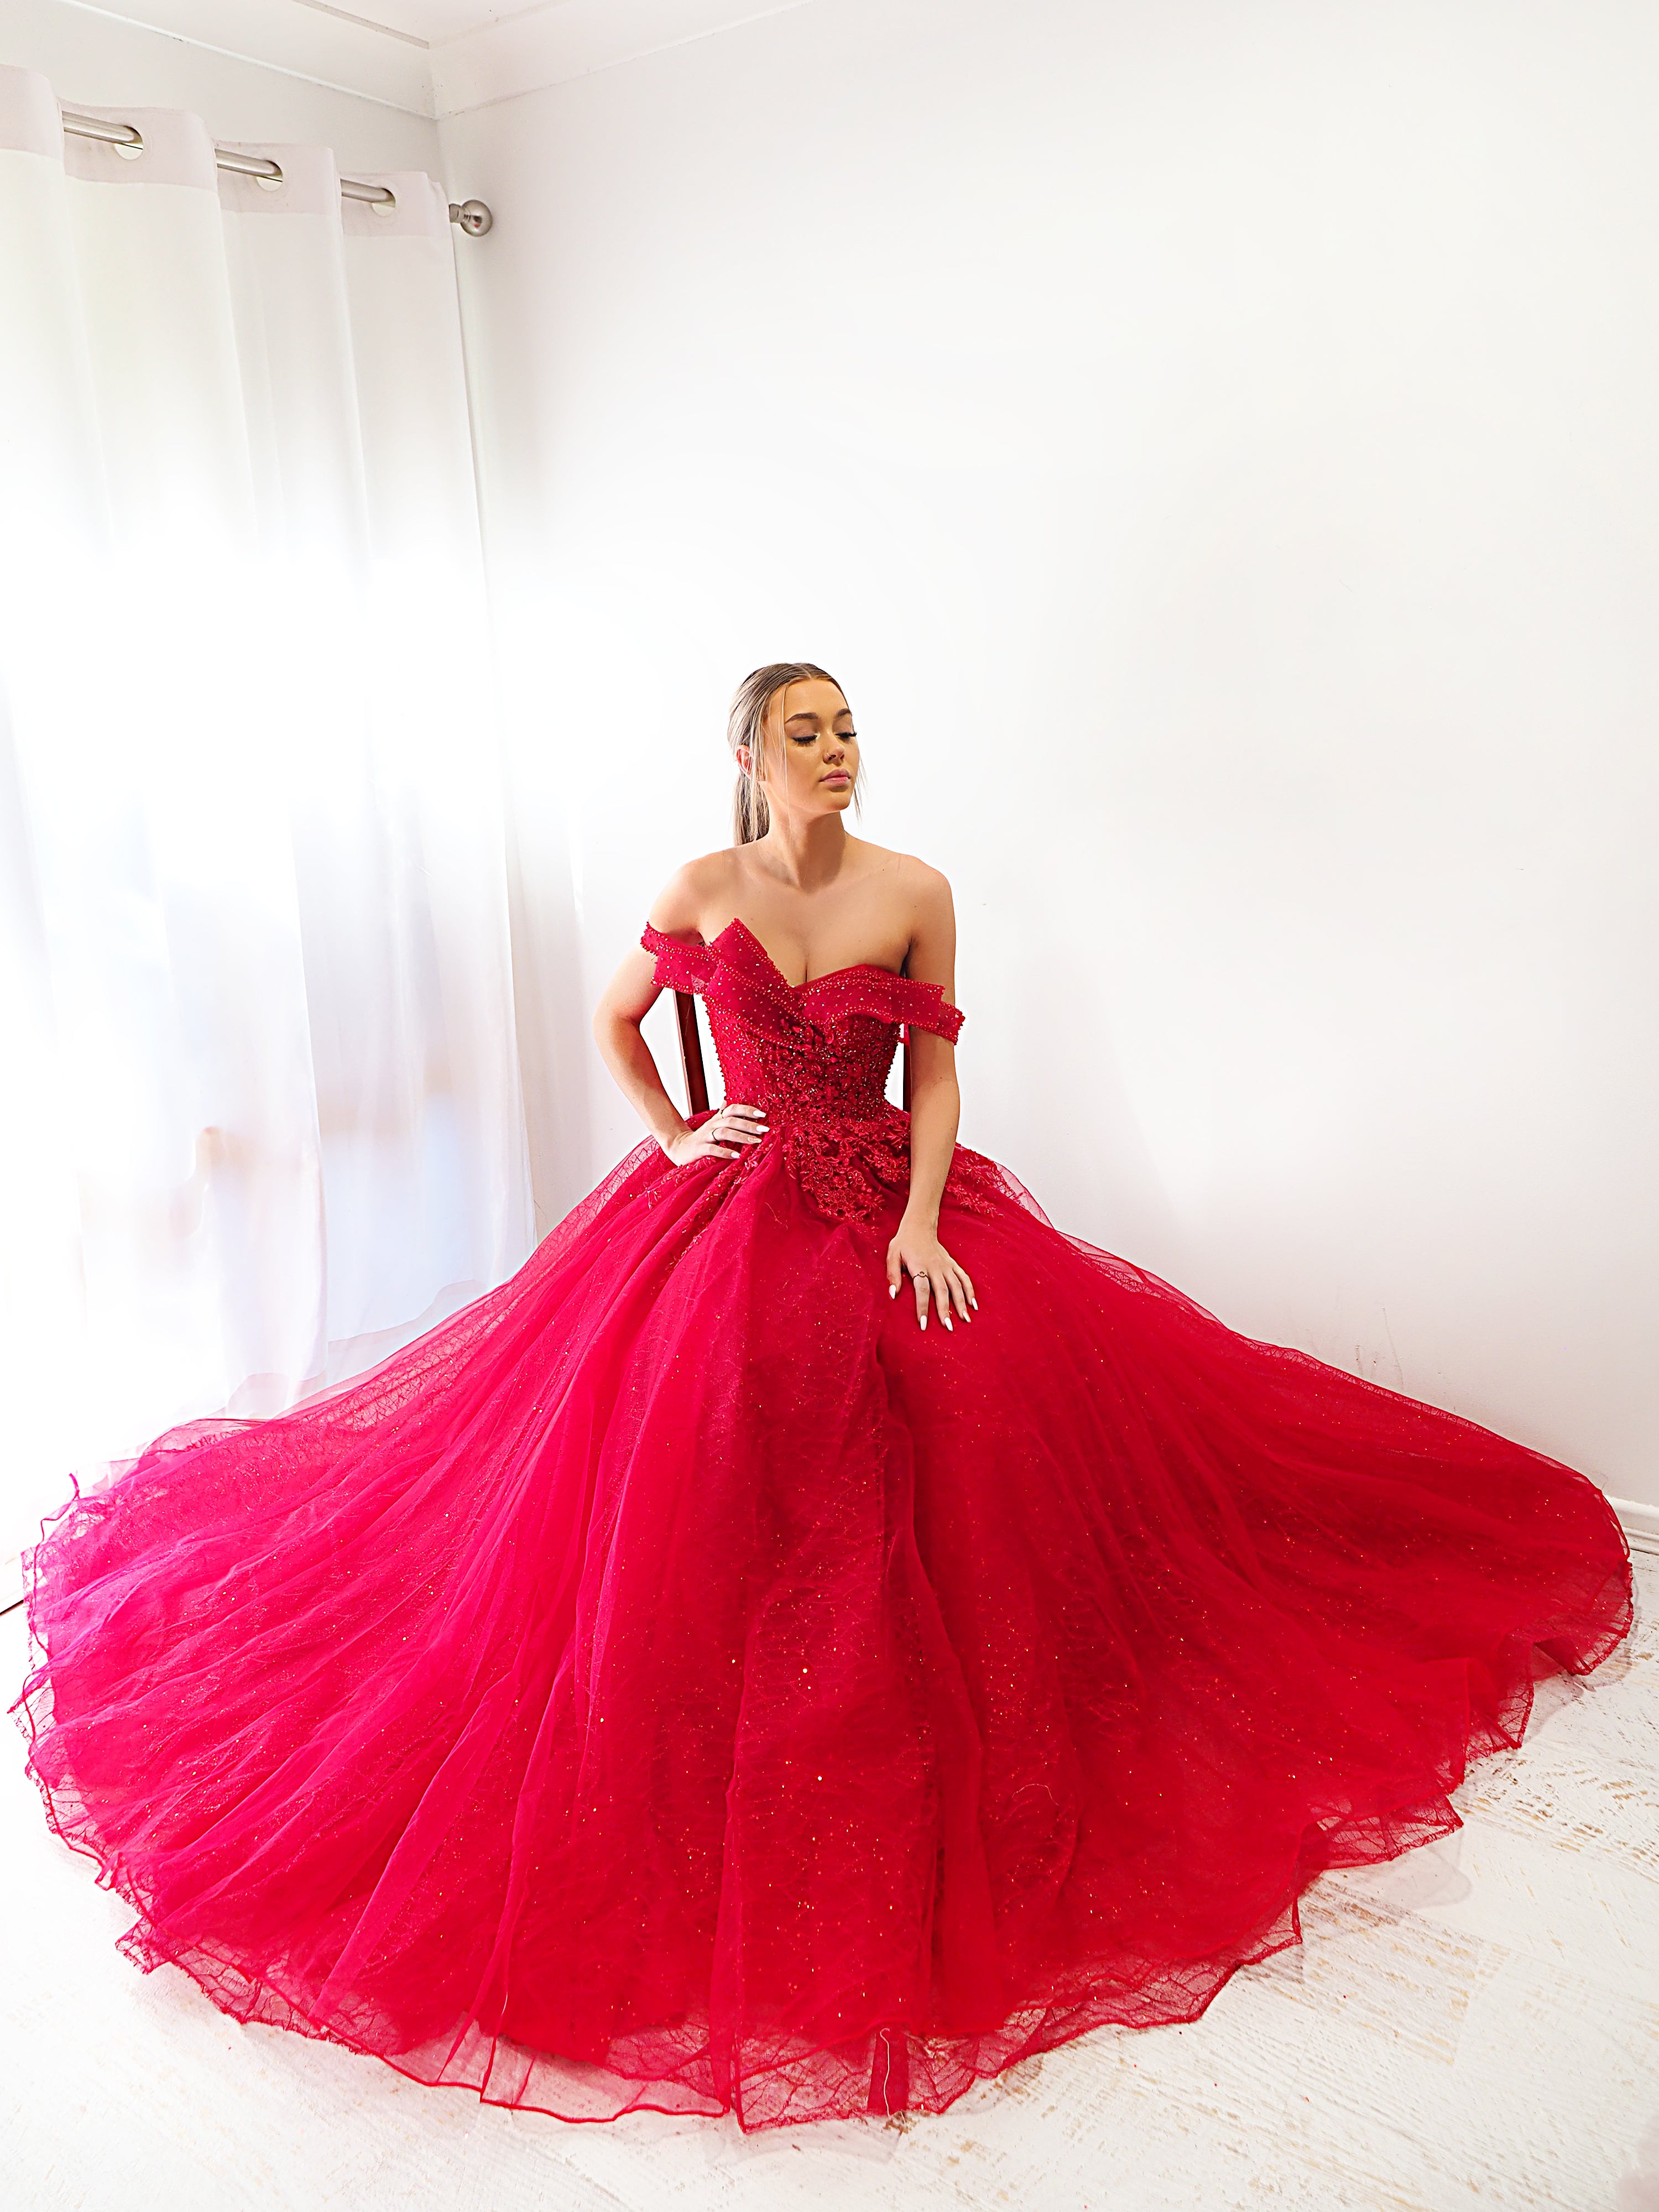 Dark red princess gown for hire – Destiny Chic